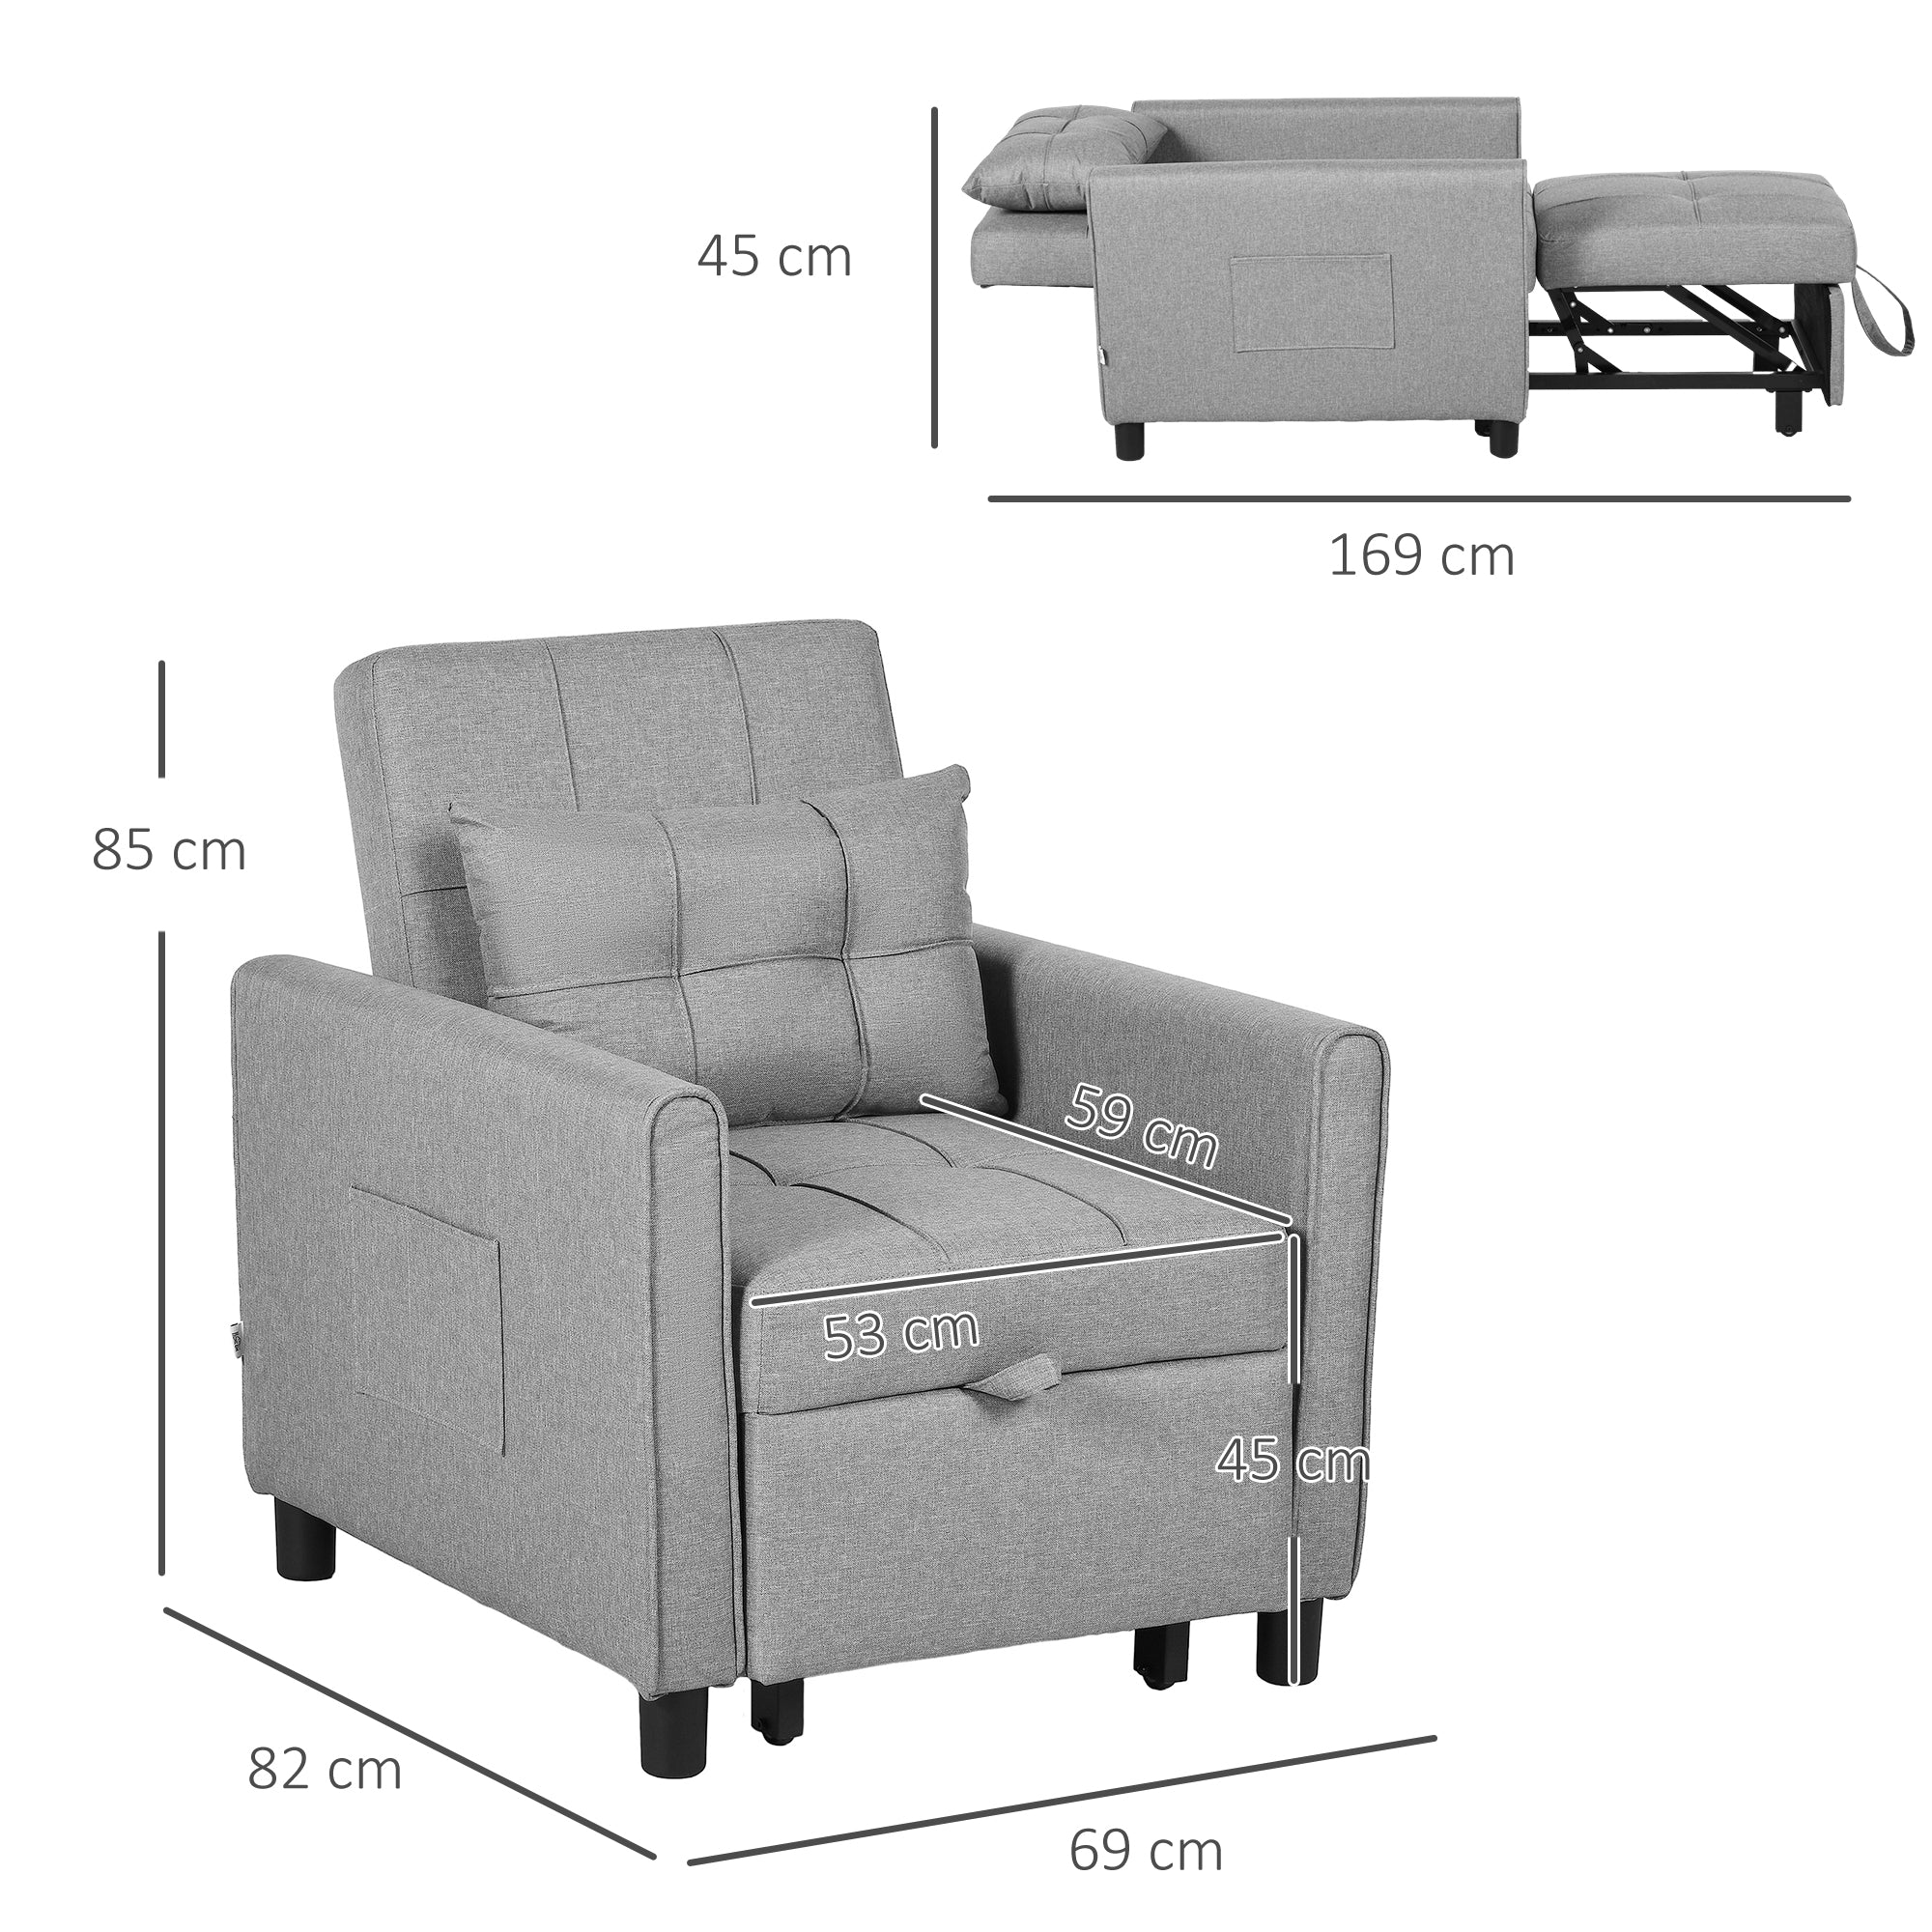 3-In-1 Convertible Chair Bed, Pull Out Sleeper Chair, Fold Out Bed with Adjustable Backrest, Side Pockets, Light Grey-2